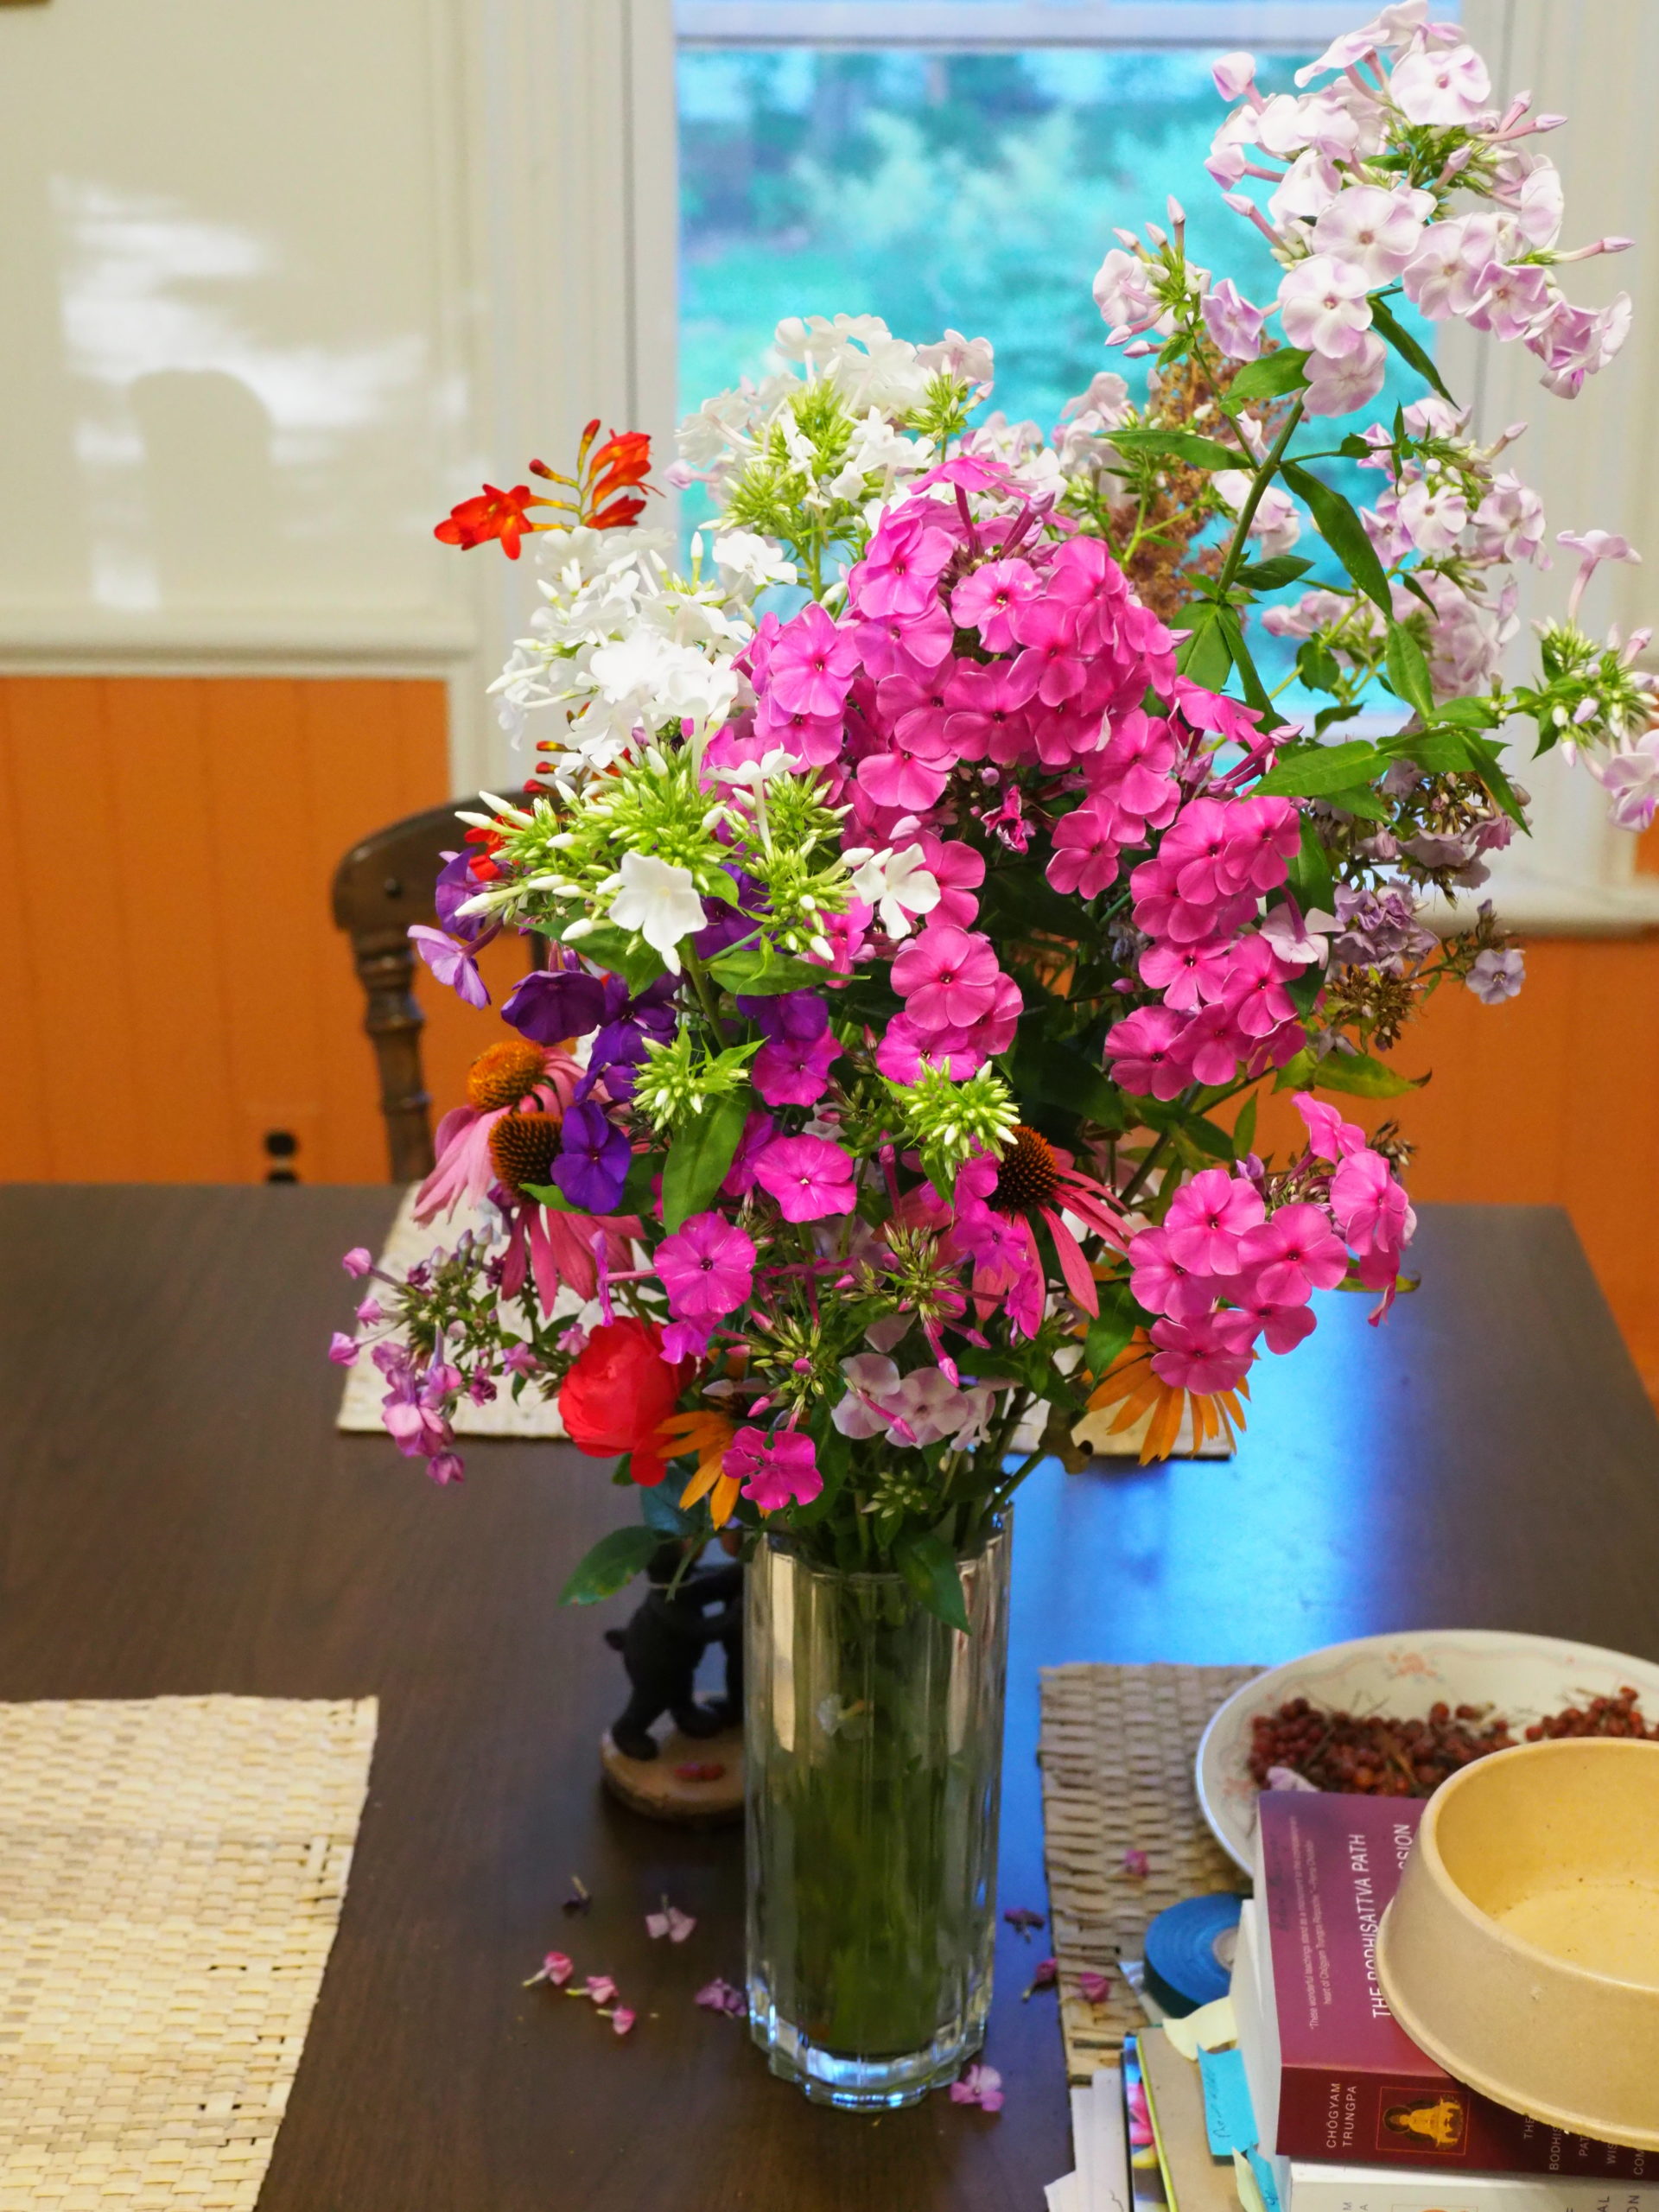 Cut flowers are always on the Hampton Gardener's kitchen table from April through November. This August vase contains six varieties of tall garden Phlox (Phlox paniculate) with a stem of Crocosmia and a few brown-eyed daisies.